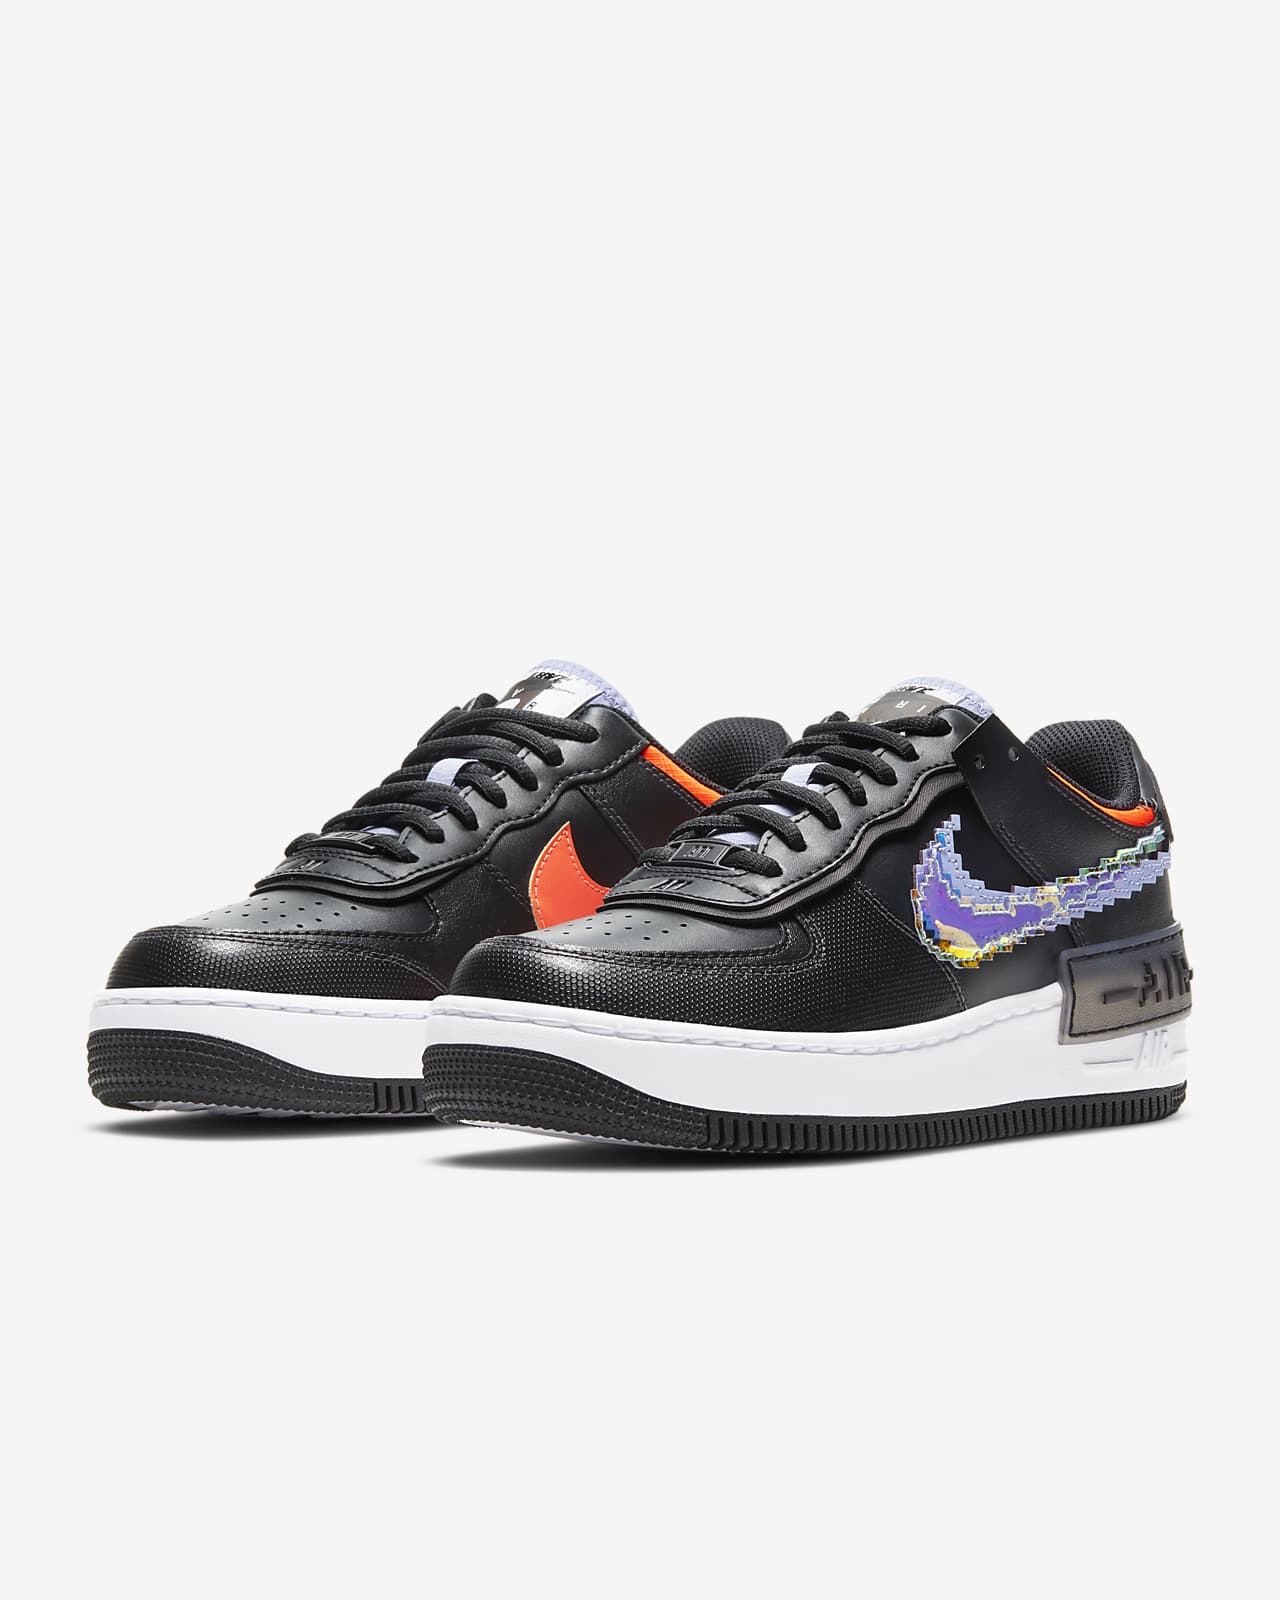 off white shadow air force 1